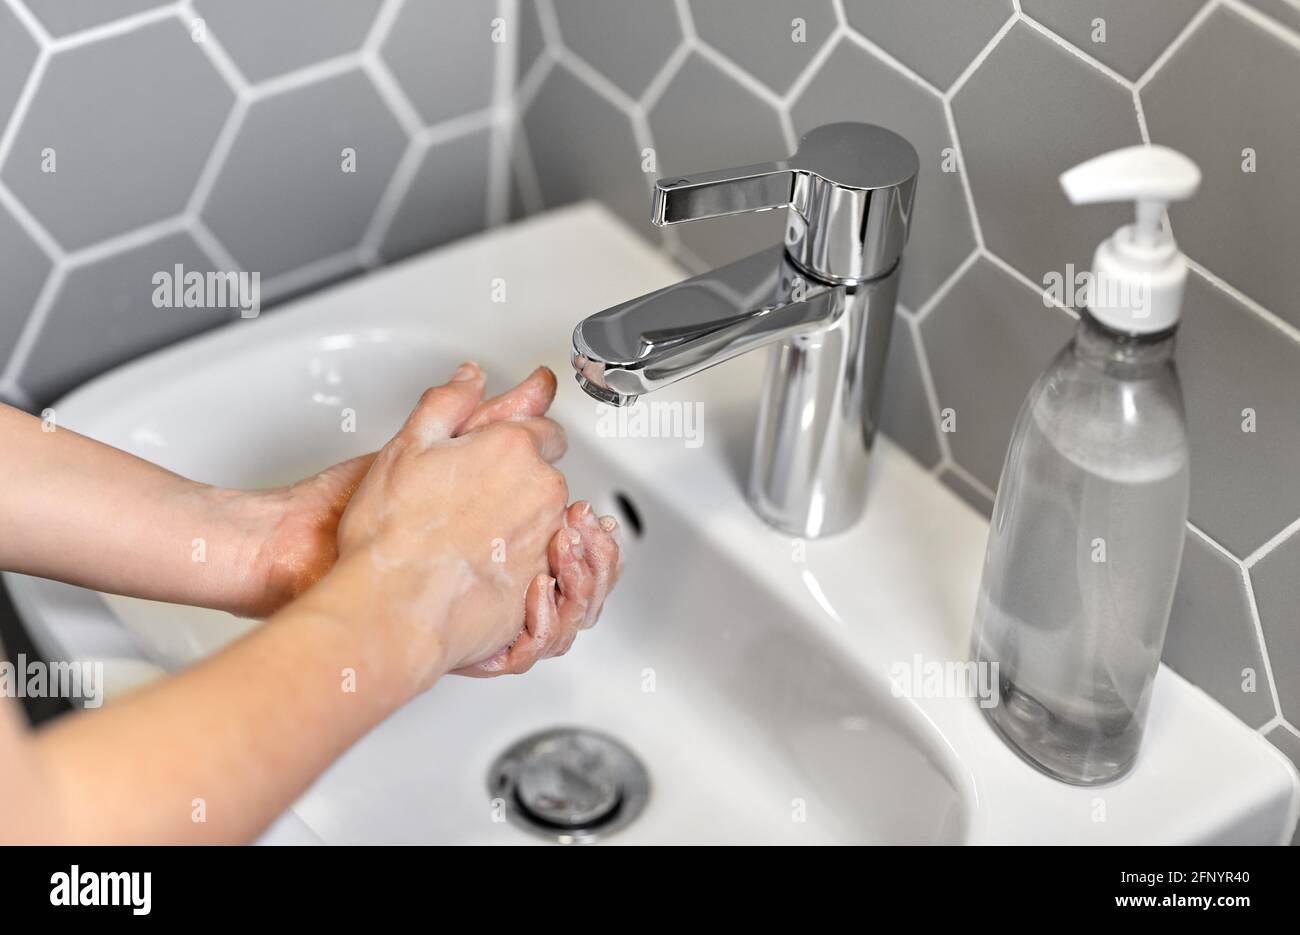 close up of woman washing hands with liquid soap Stock Photo